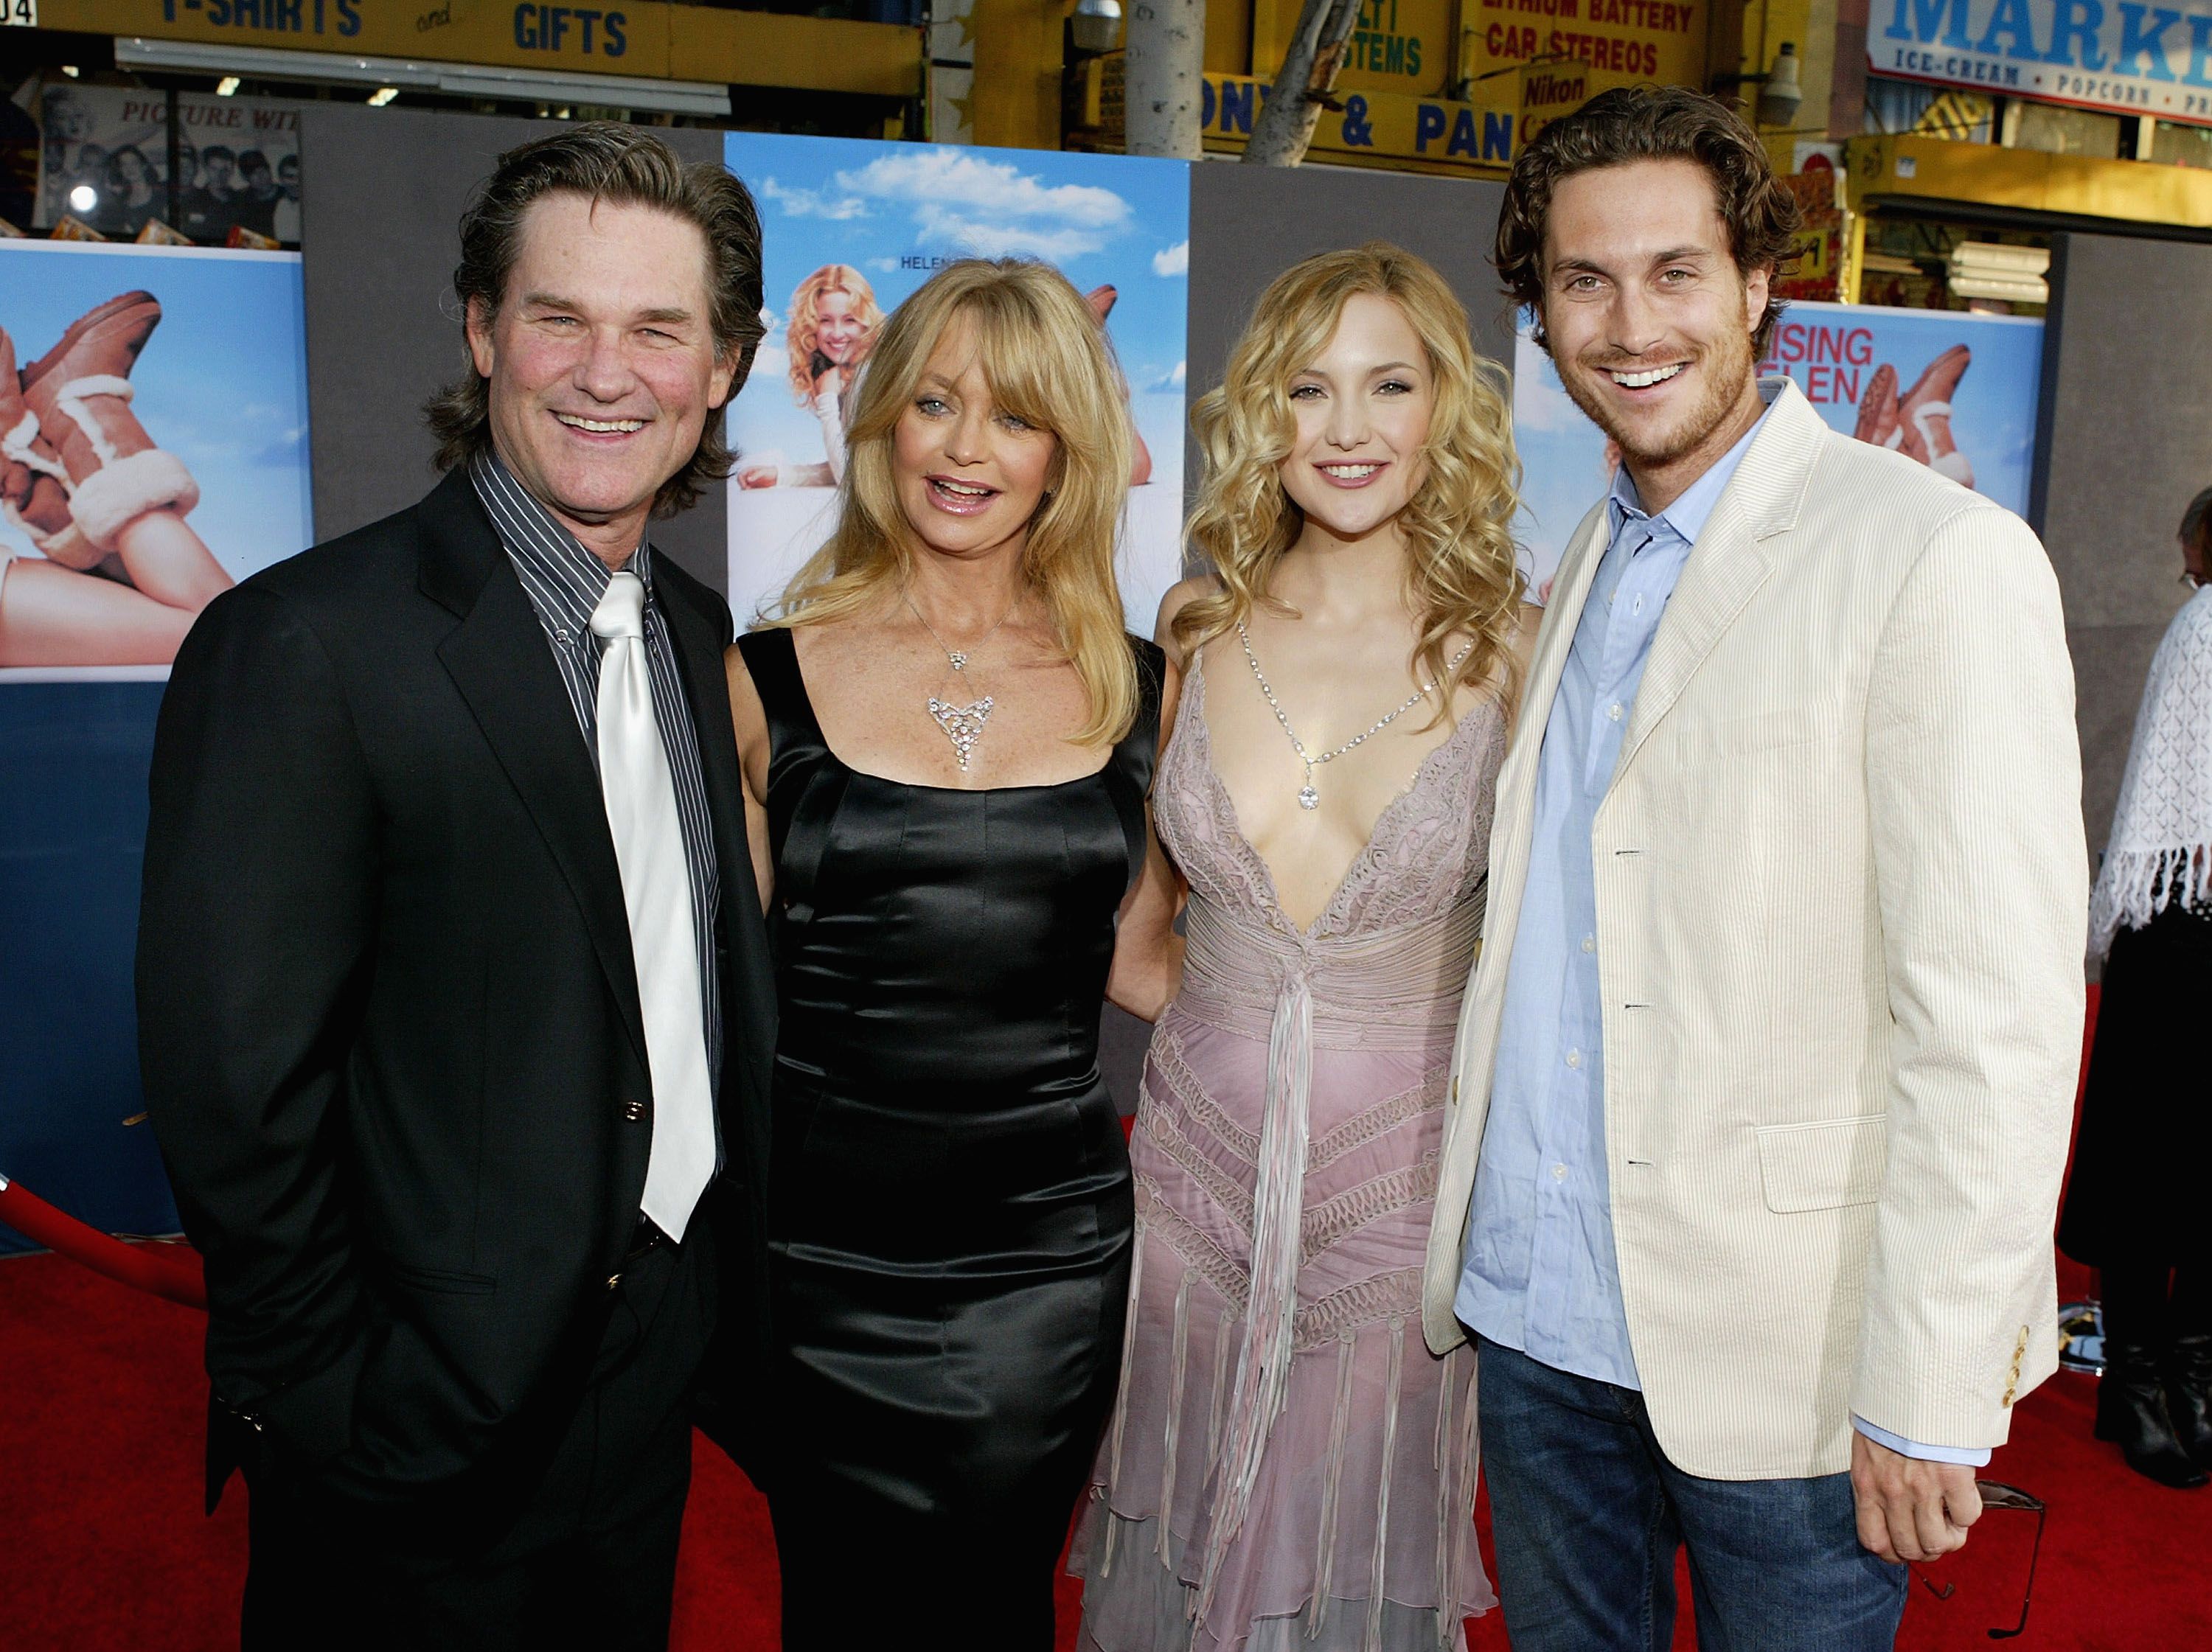 Kurt Russell, Goldie Hawn, and her children, Kate Hudson and Oliver Hudson, at the premiere of "Raising Helen" in 2004 | Source: Getty Images